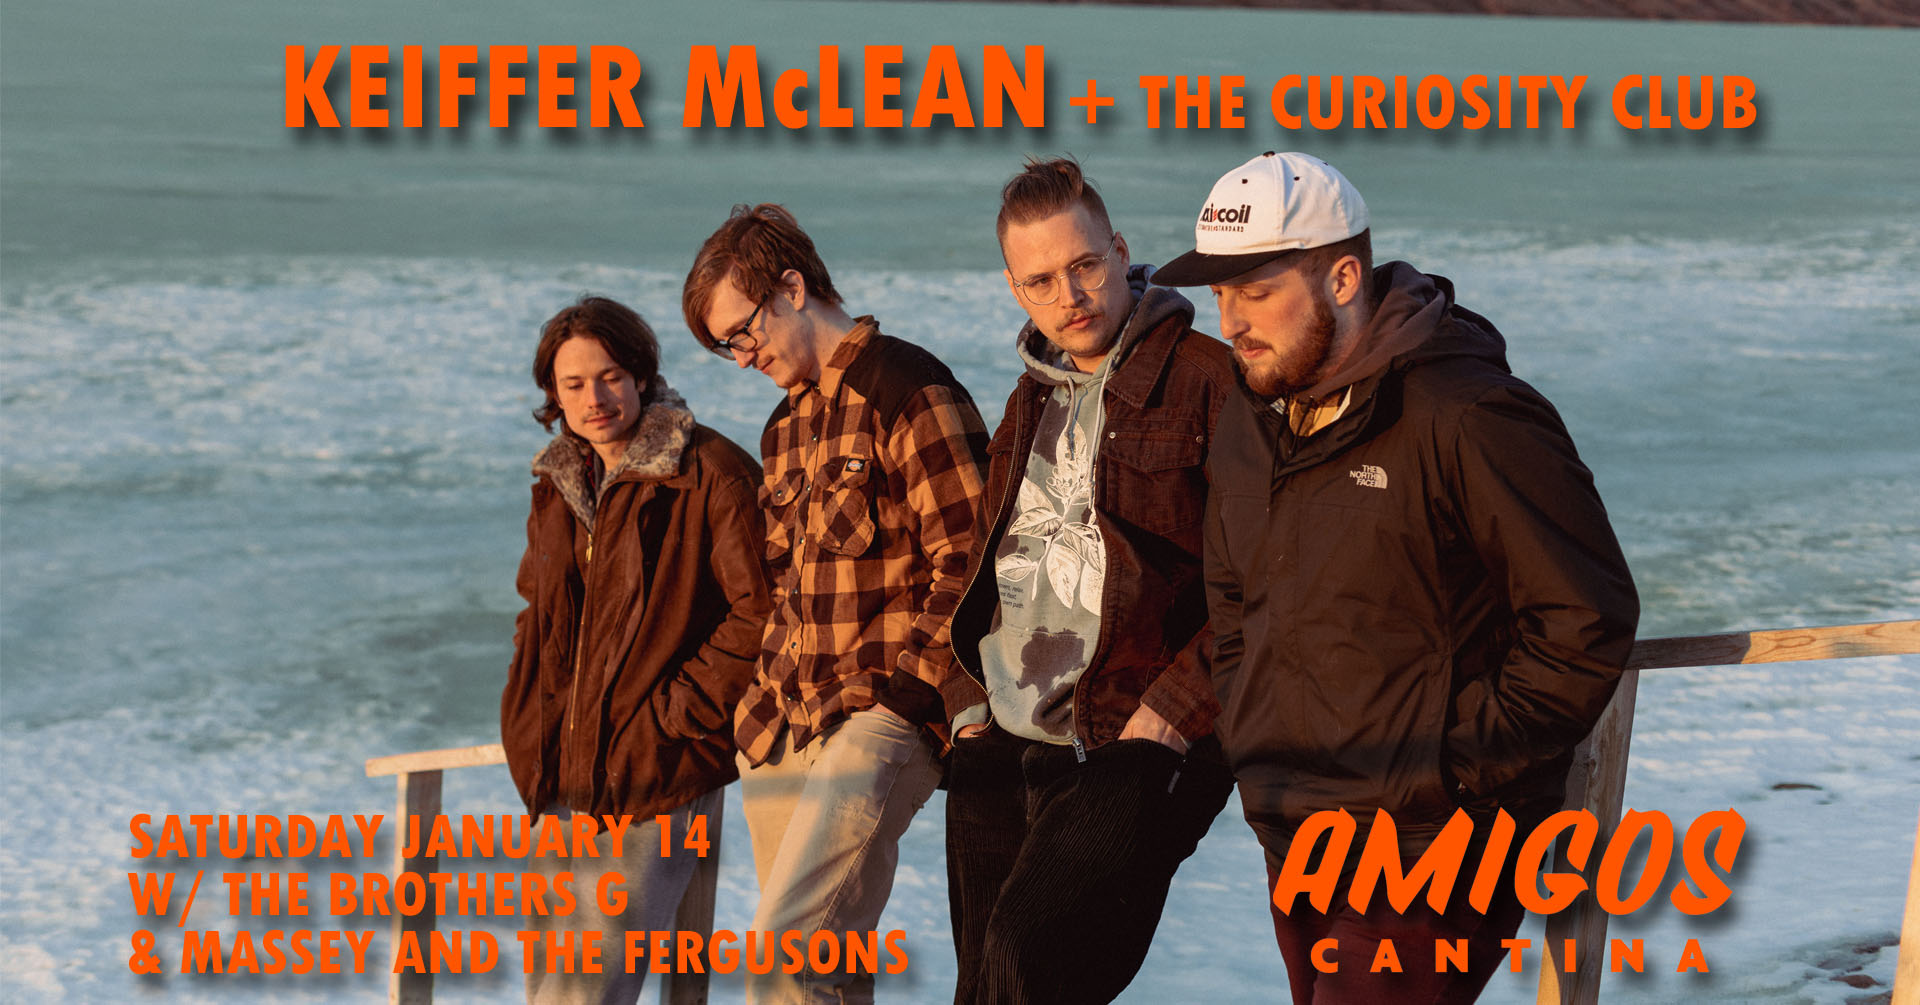 Keiffer McLean + The Curiosity Club w/ The Brothers G and Massey &#038; The Fergusons